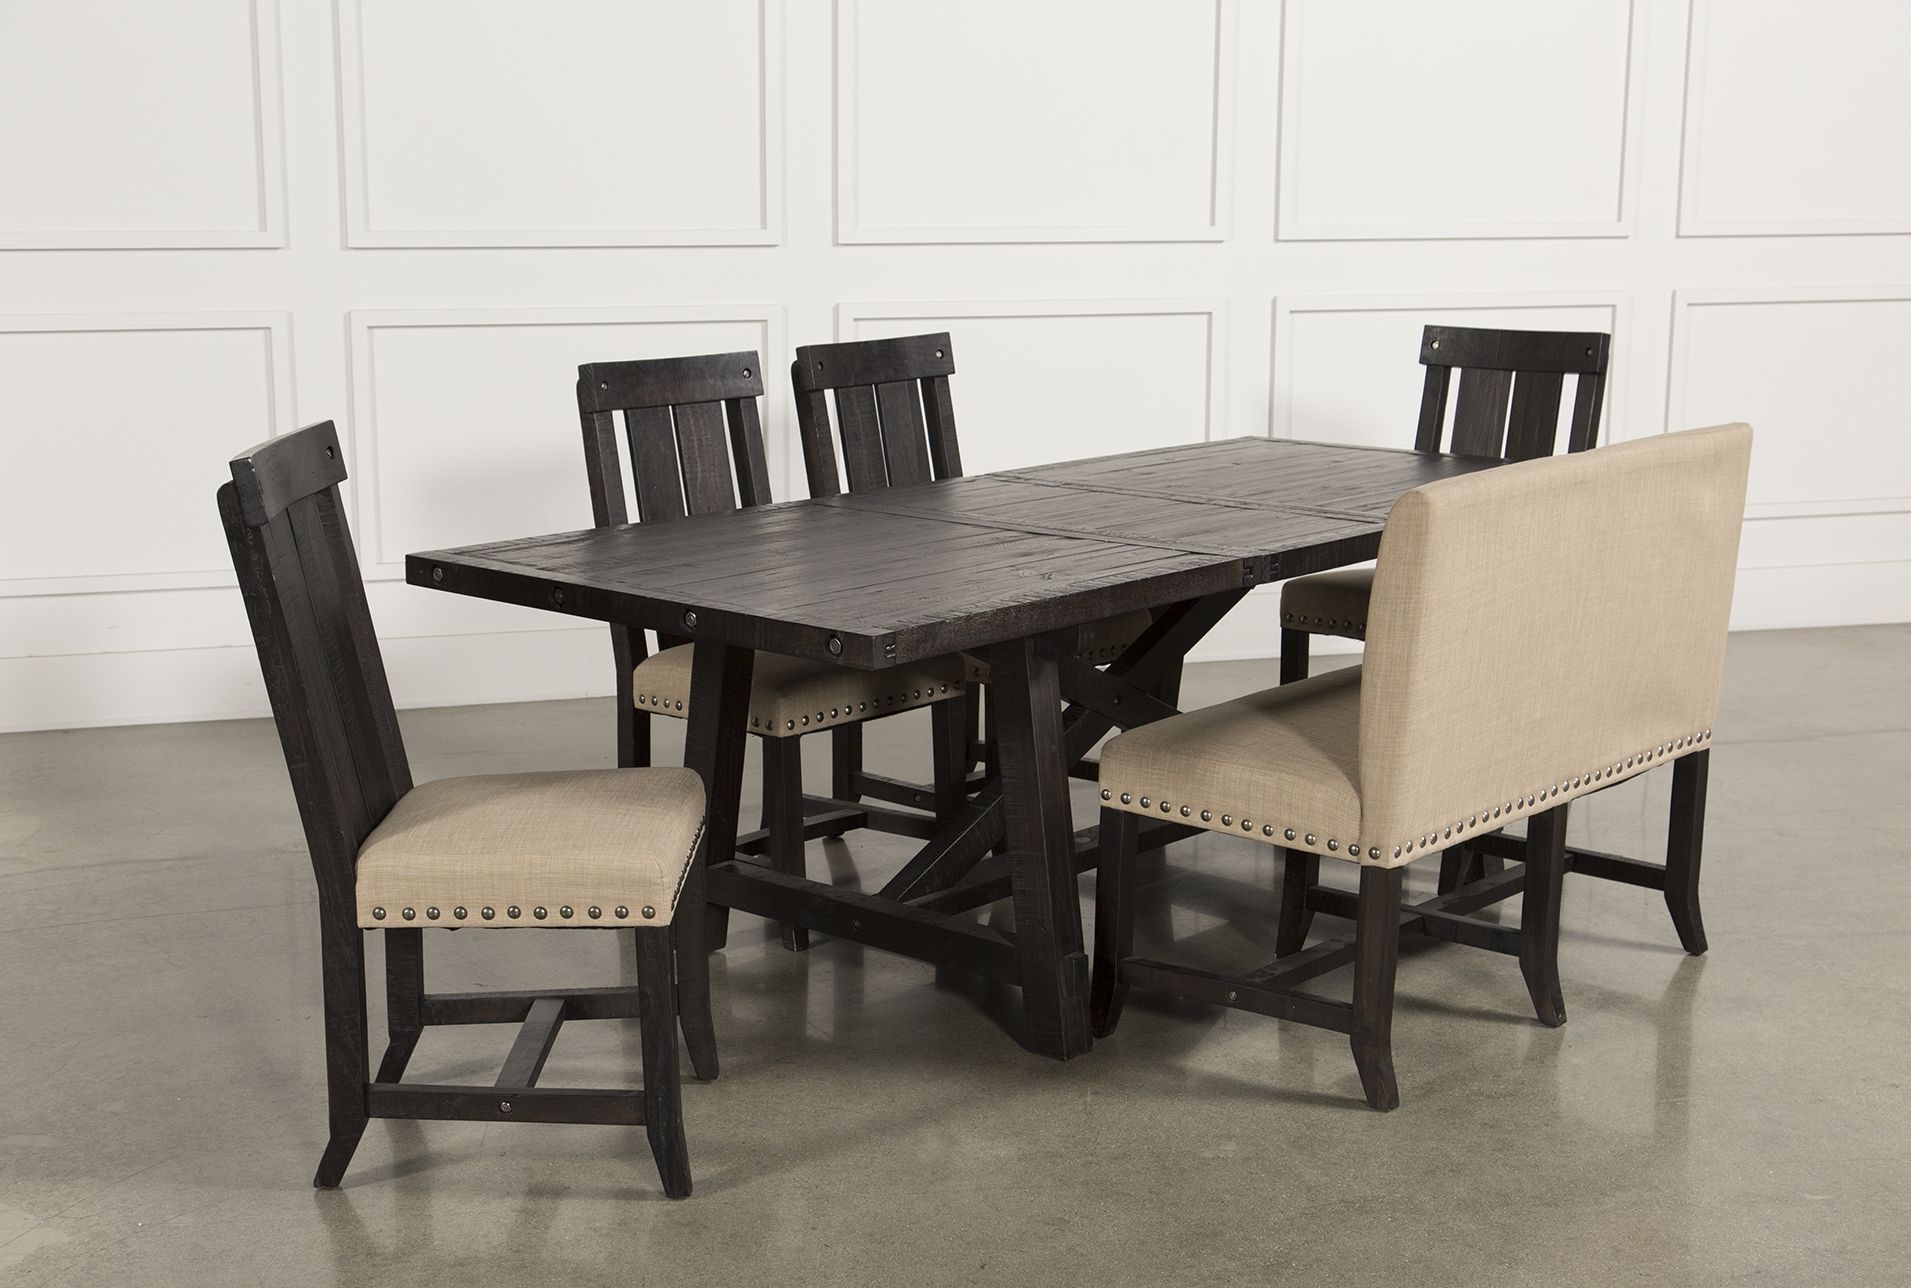 Jaxon 6 Piece Rectangle Dining Set W/bench & Wood Chairs | Products Throughout Most Up To Date Jaxon Grey 5 Piece Extension Counter Sets With Wood Stools (View 9 of 20)